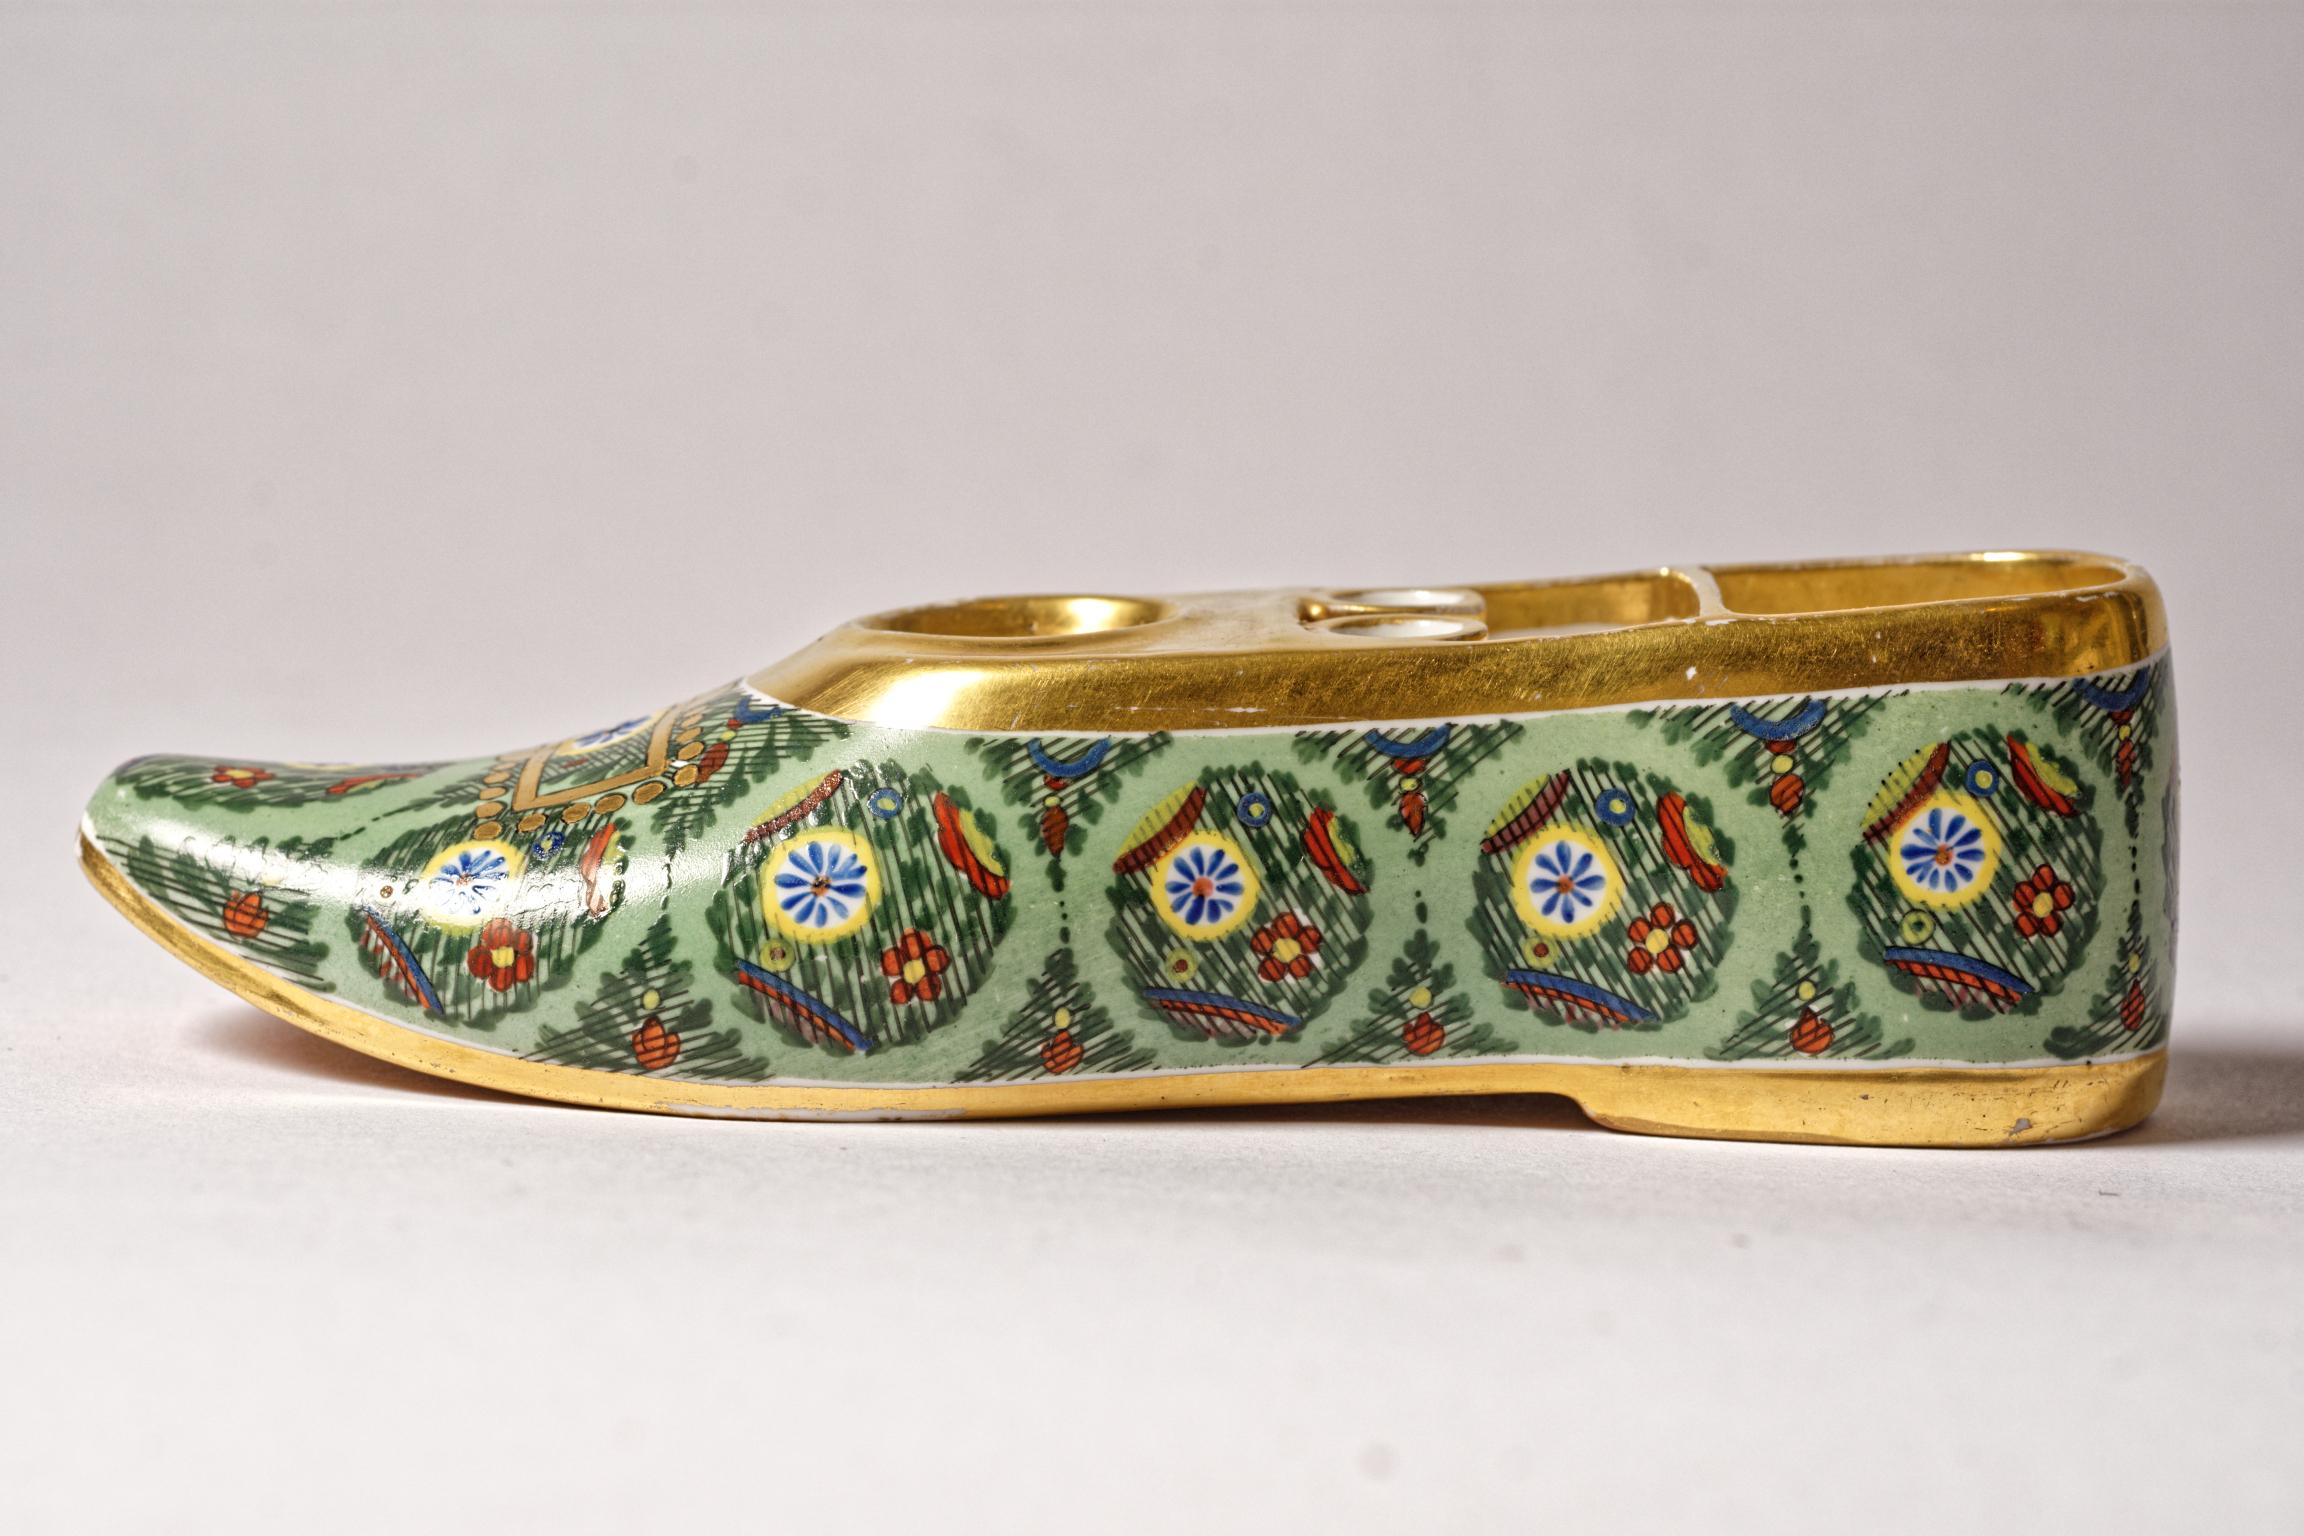 British Spode circa 1820 Vibrant Shoe or Slipper Inkwell Base, Hand Painted Rare Object